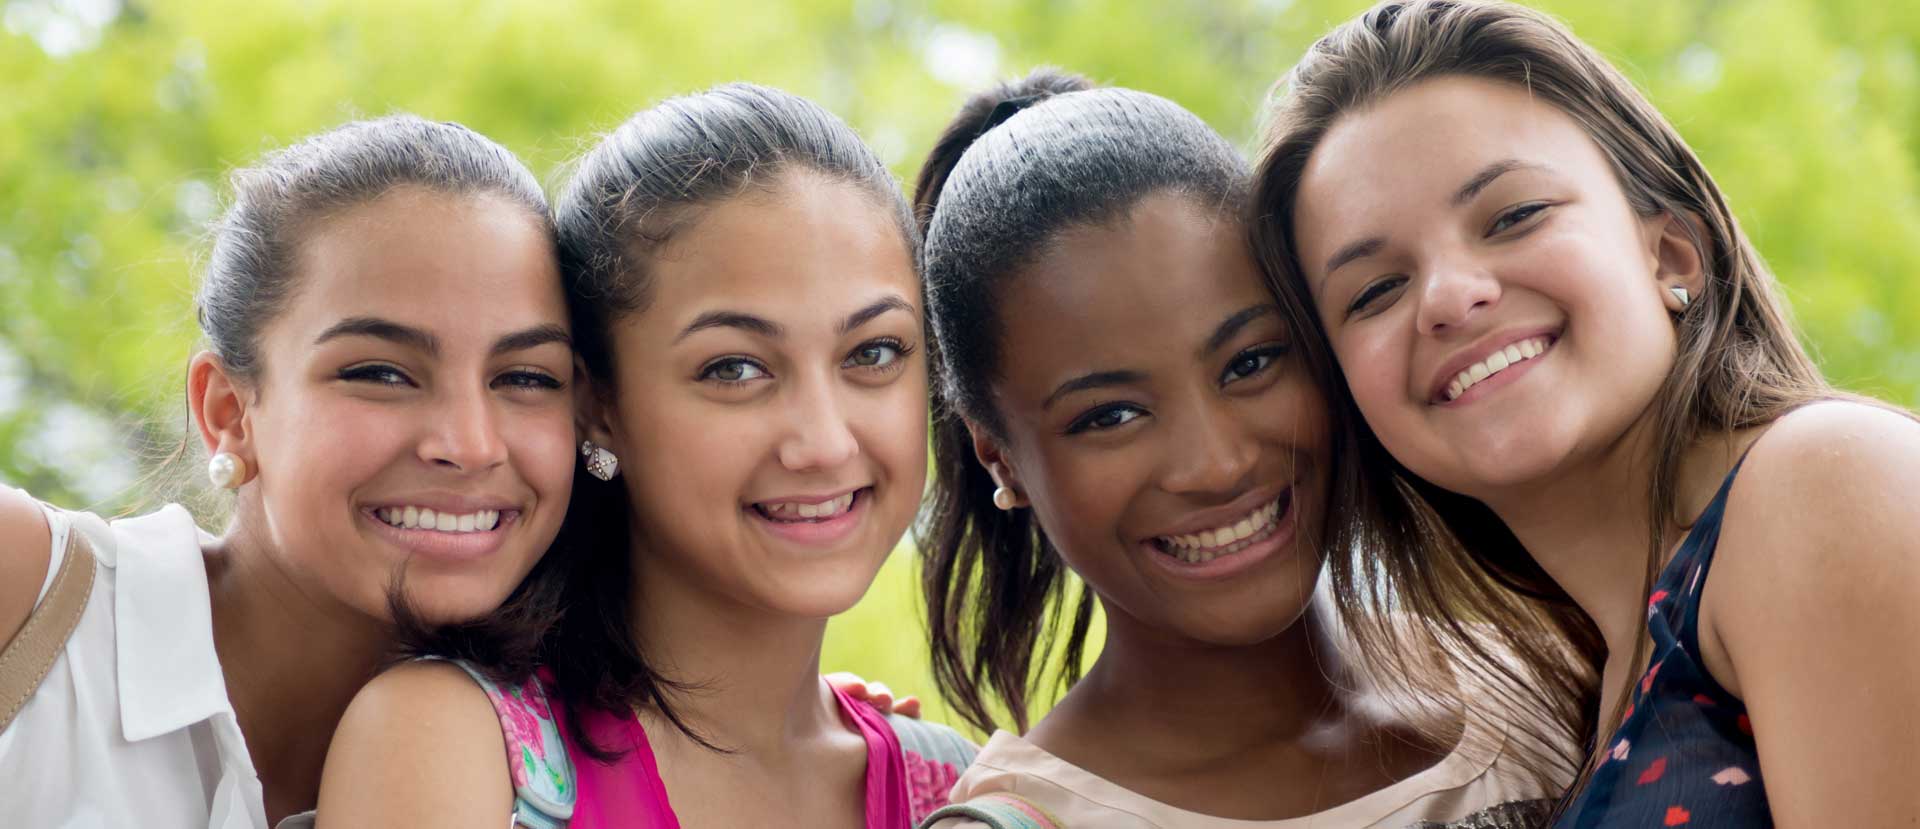 North Pointe OB/GYN Associates, LLC - Cumming Obstetricians & Gynecologists cares for teen adolescent girls